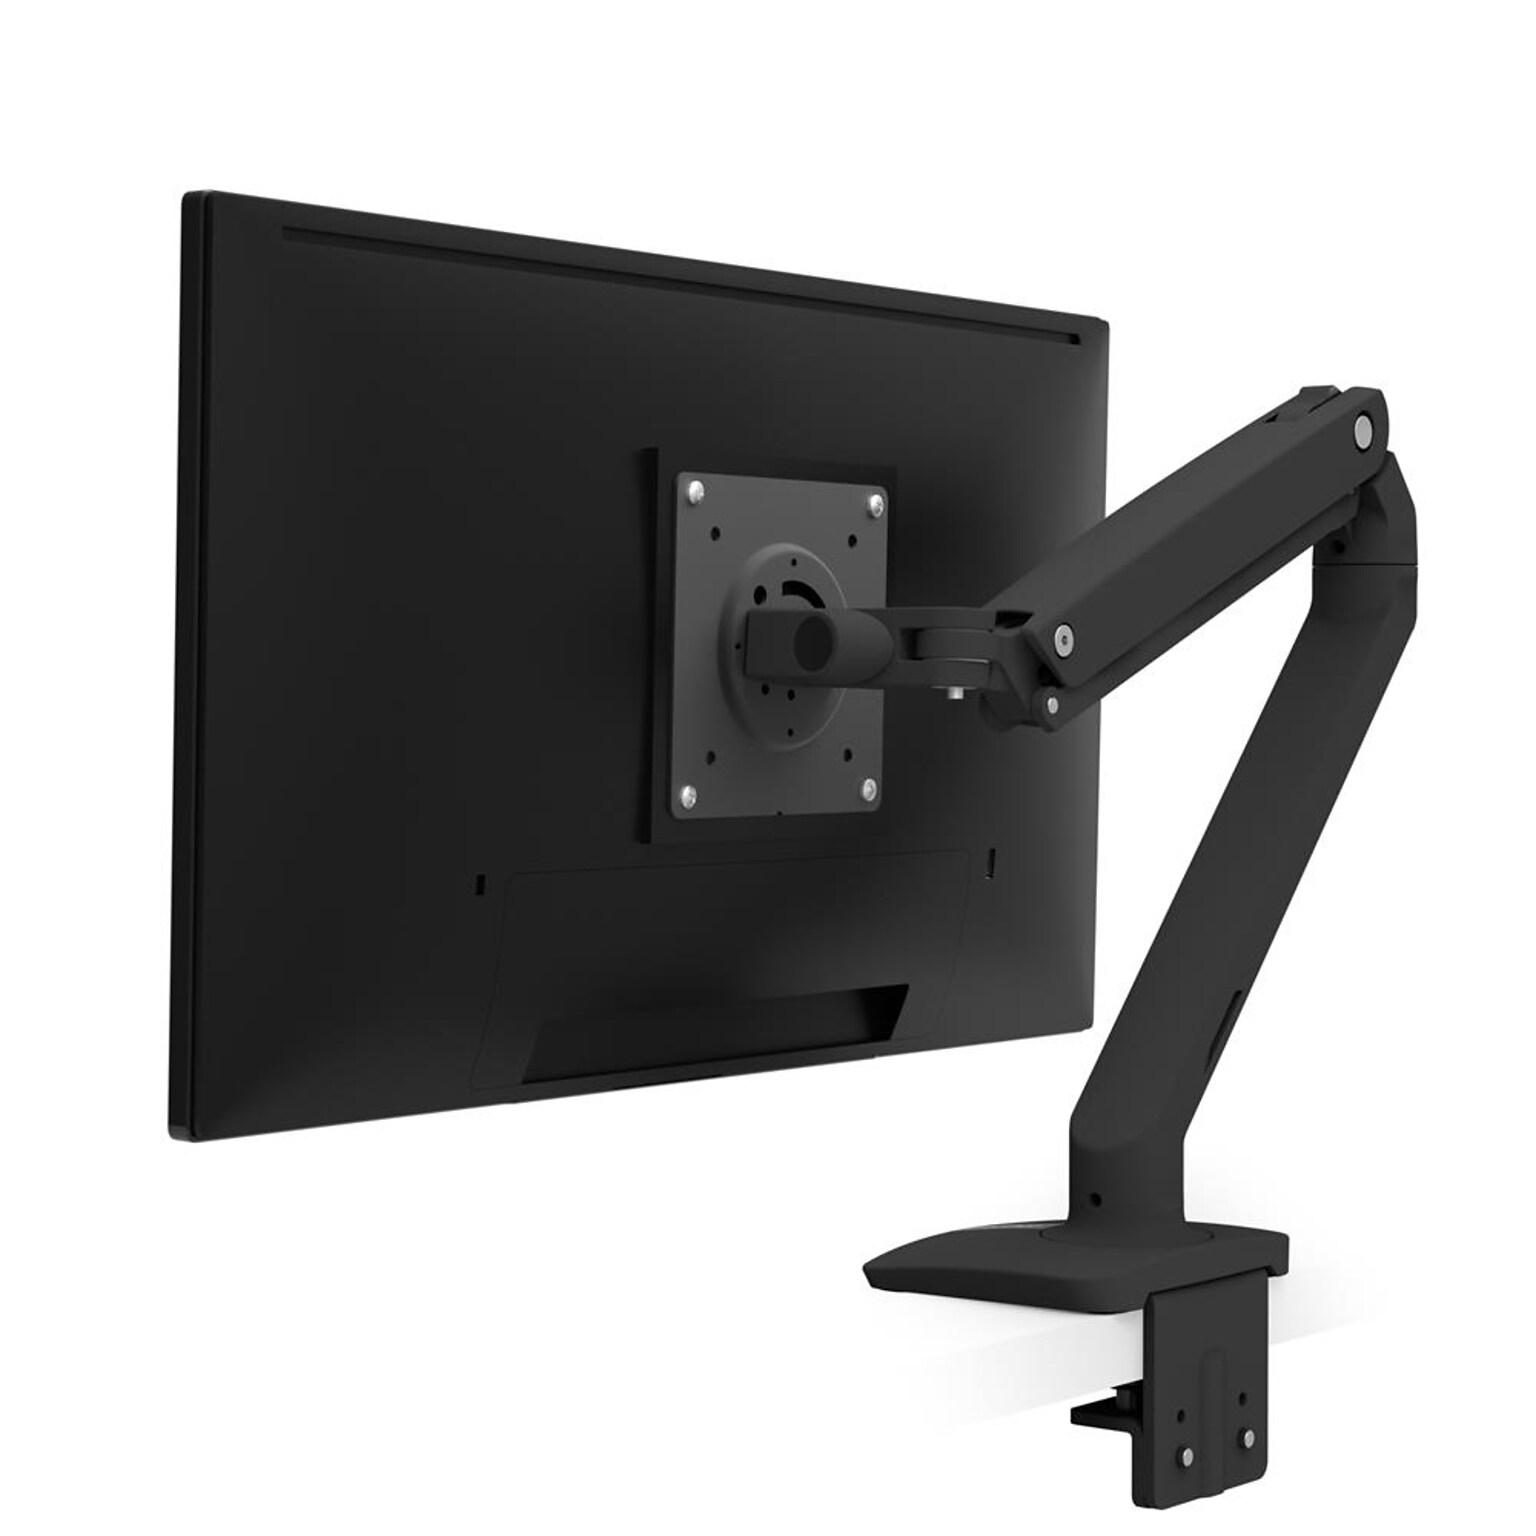 Ergotron MXV Desk Adjustable Single Arm with 2-Piece Clamp, 34 Screen Support, Black (45-486-224)